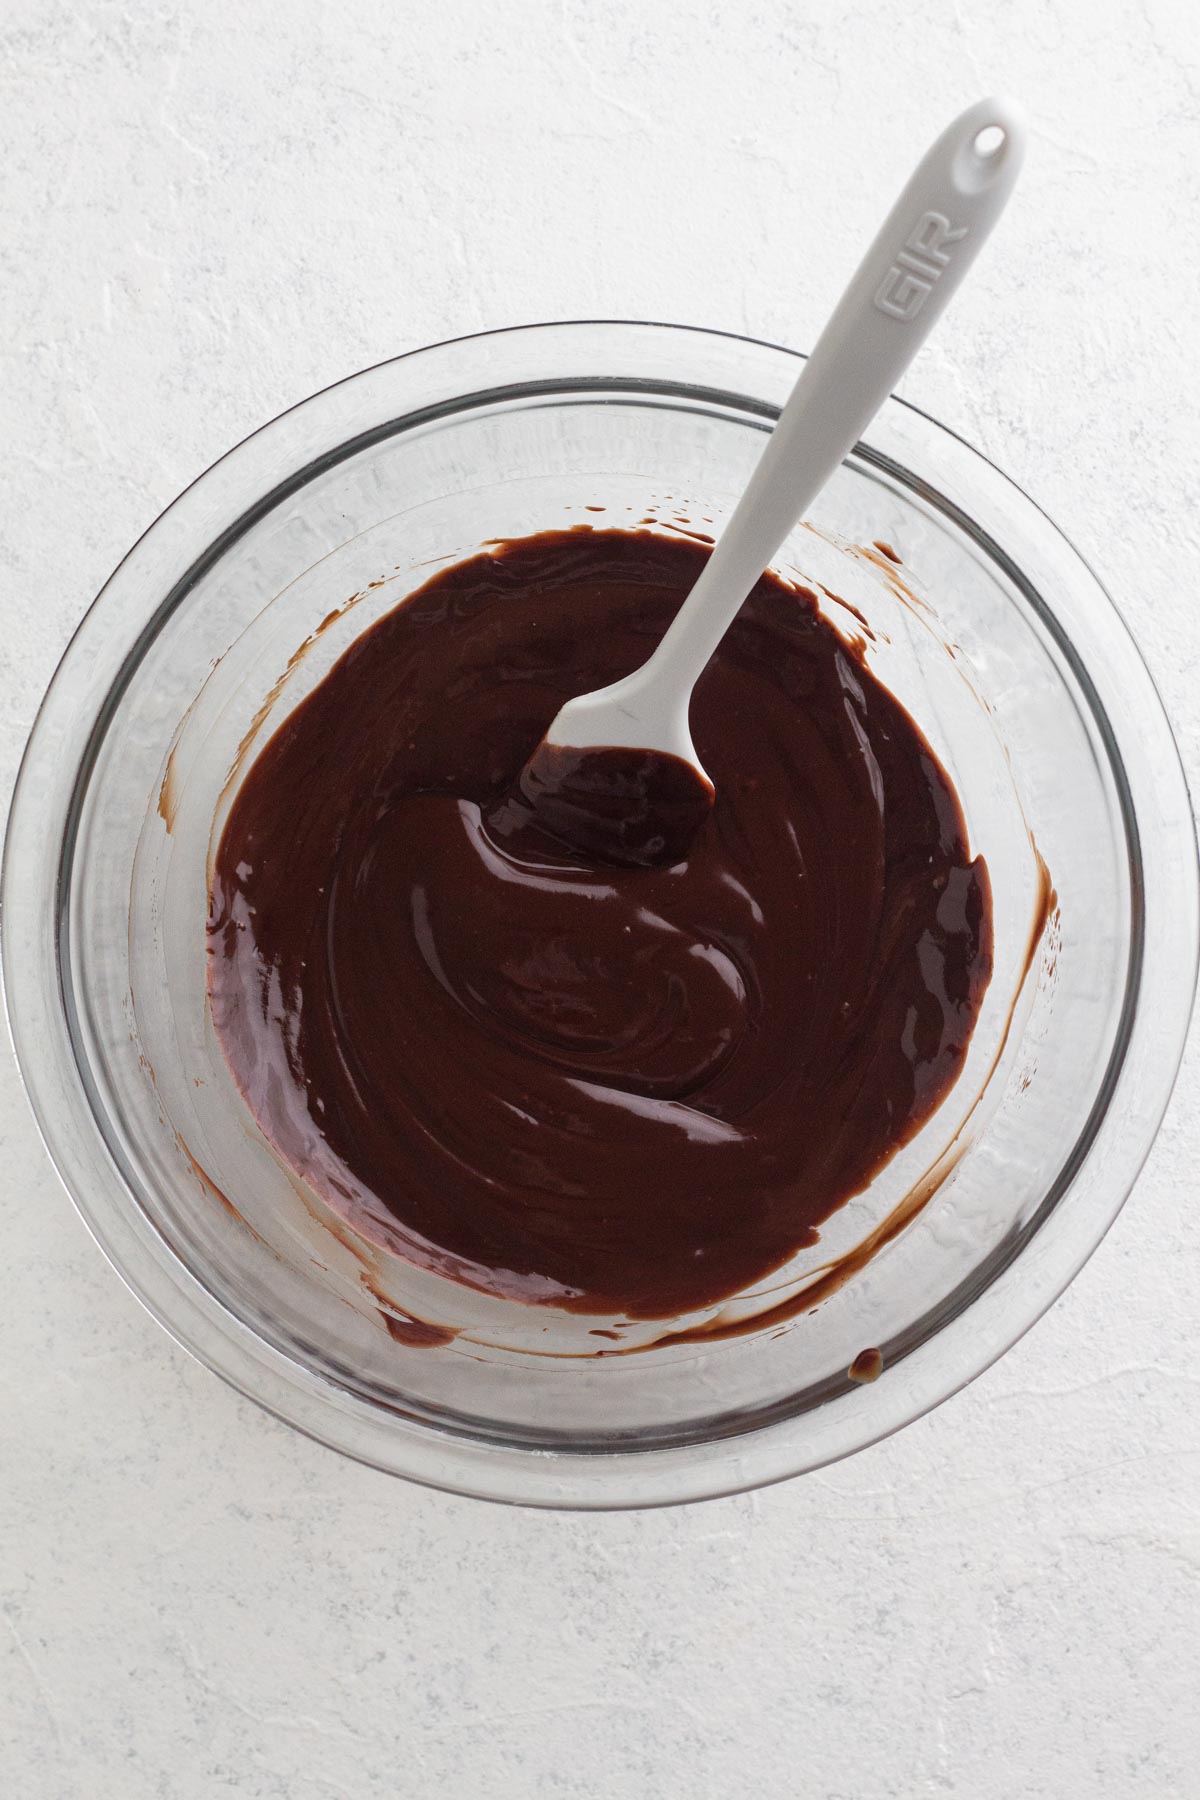 Chocolate ganache in a glass bowl with a white spatula.